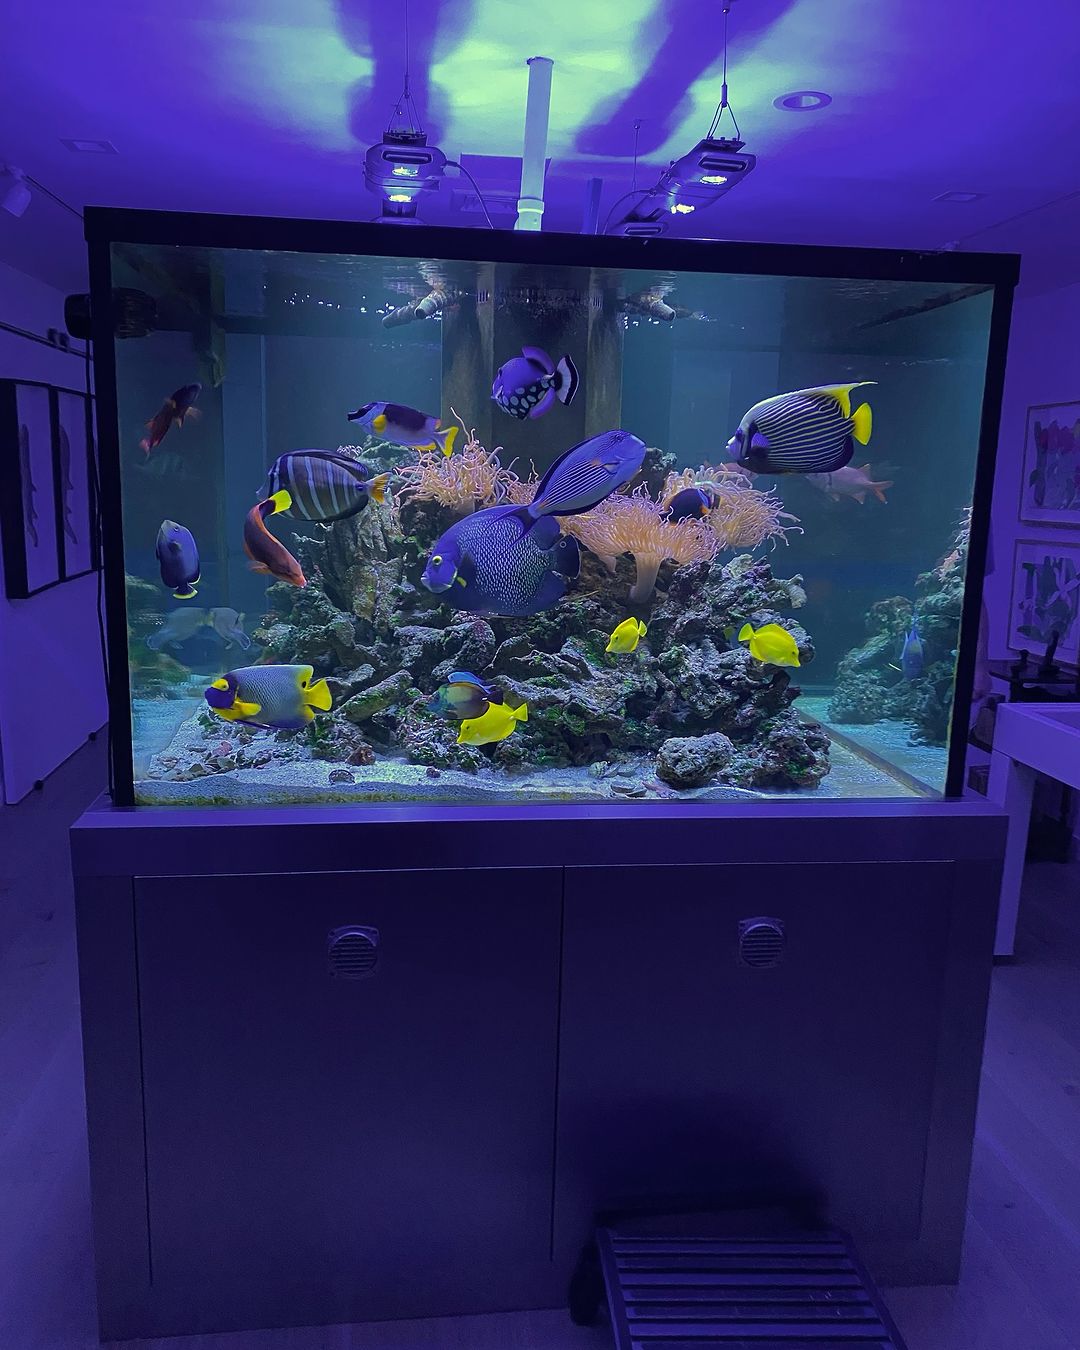 Transform Your Space with JKFishs Exquisite Fish Tanks - New Jersey - Jersey City ID1556345